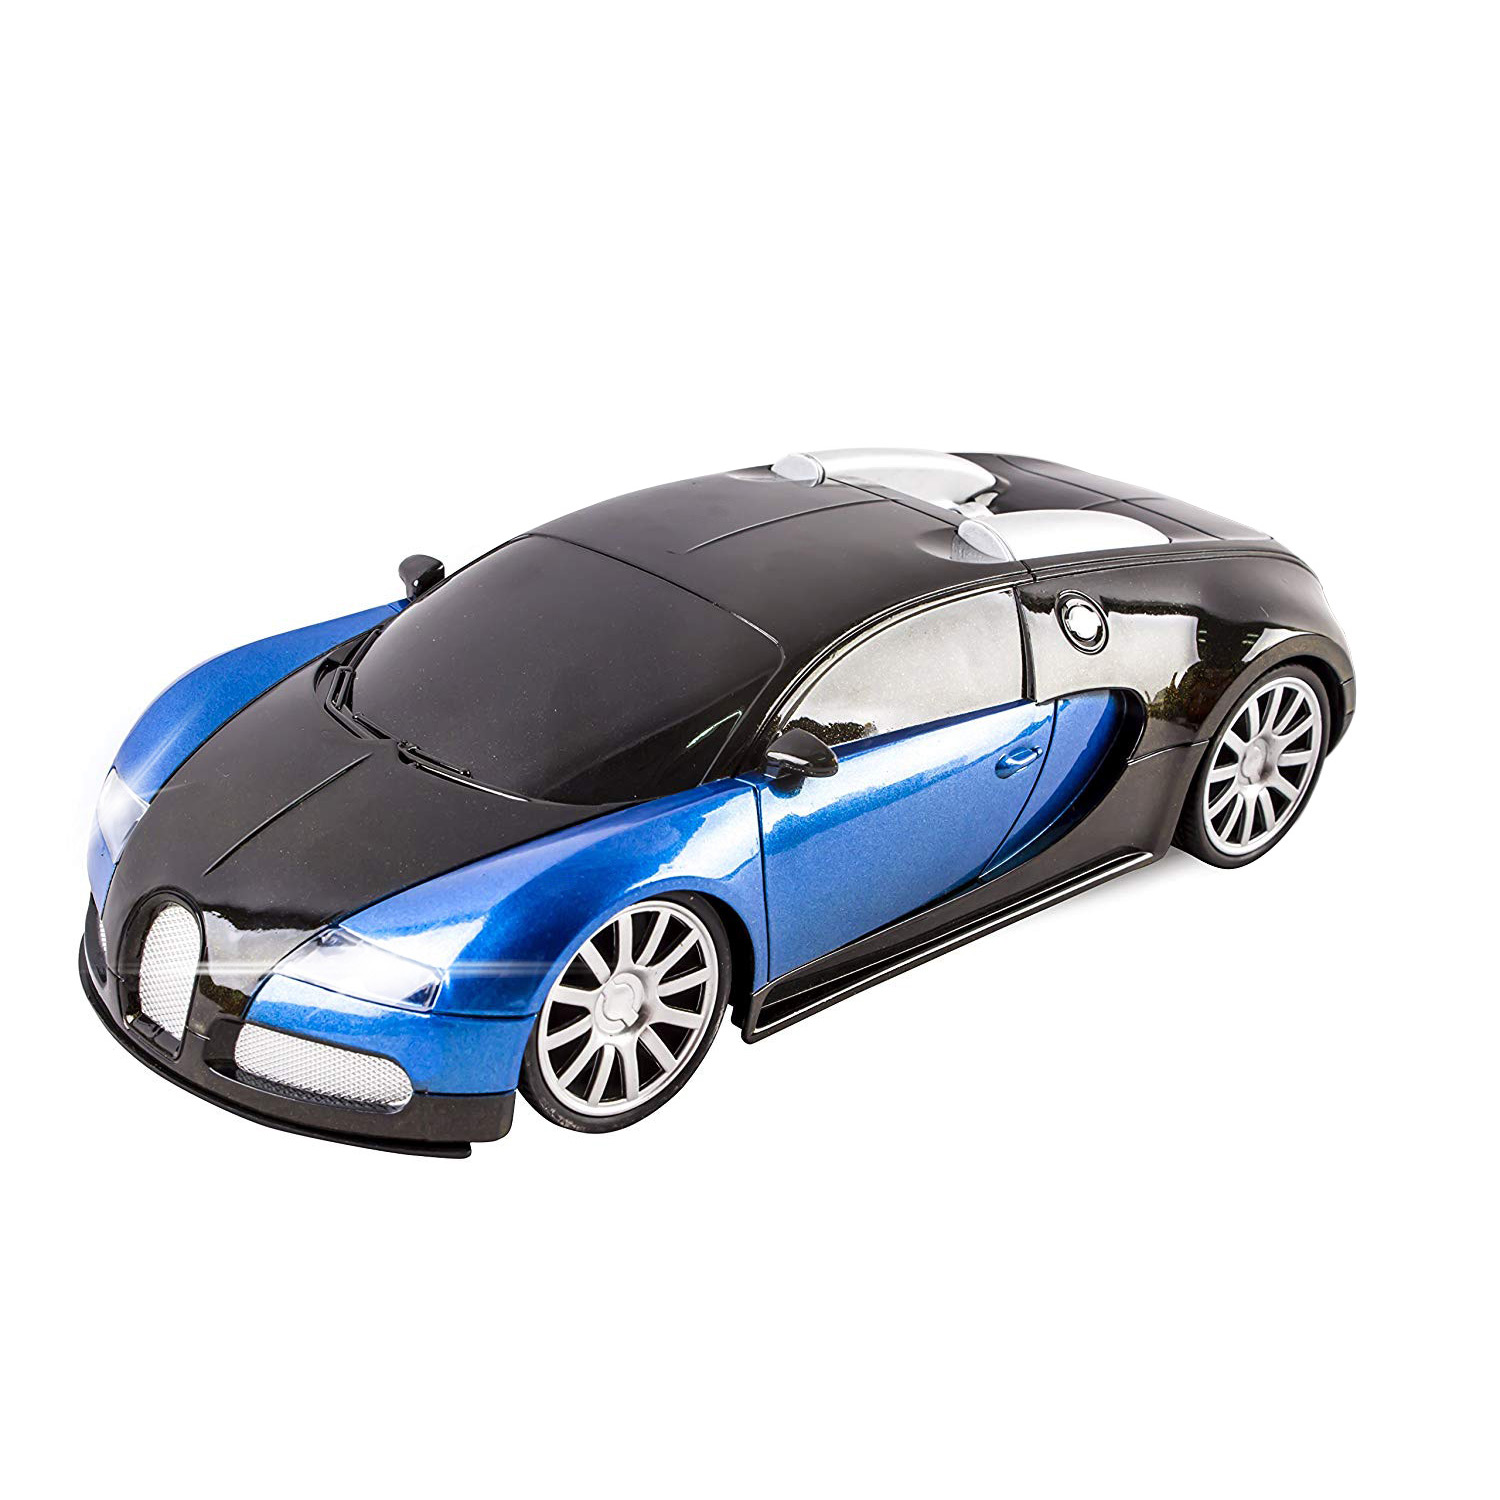 Super Exotic RC Car 116 Scale Remote Control Sports Cars For Kids with Working Headlights Easy To Operate Toy Race Vehicle Colors May Vary